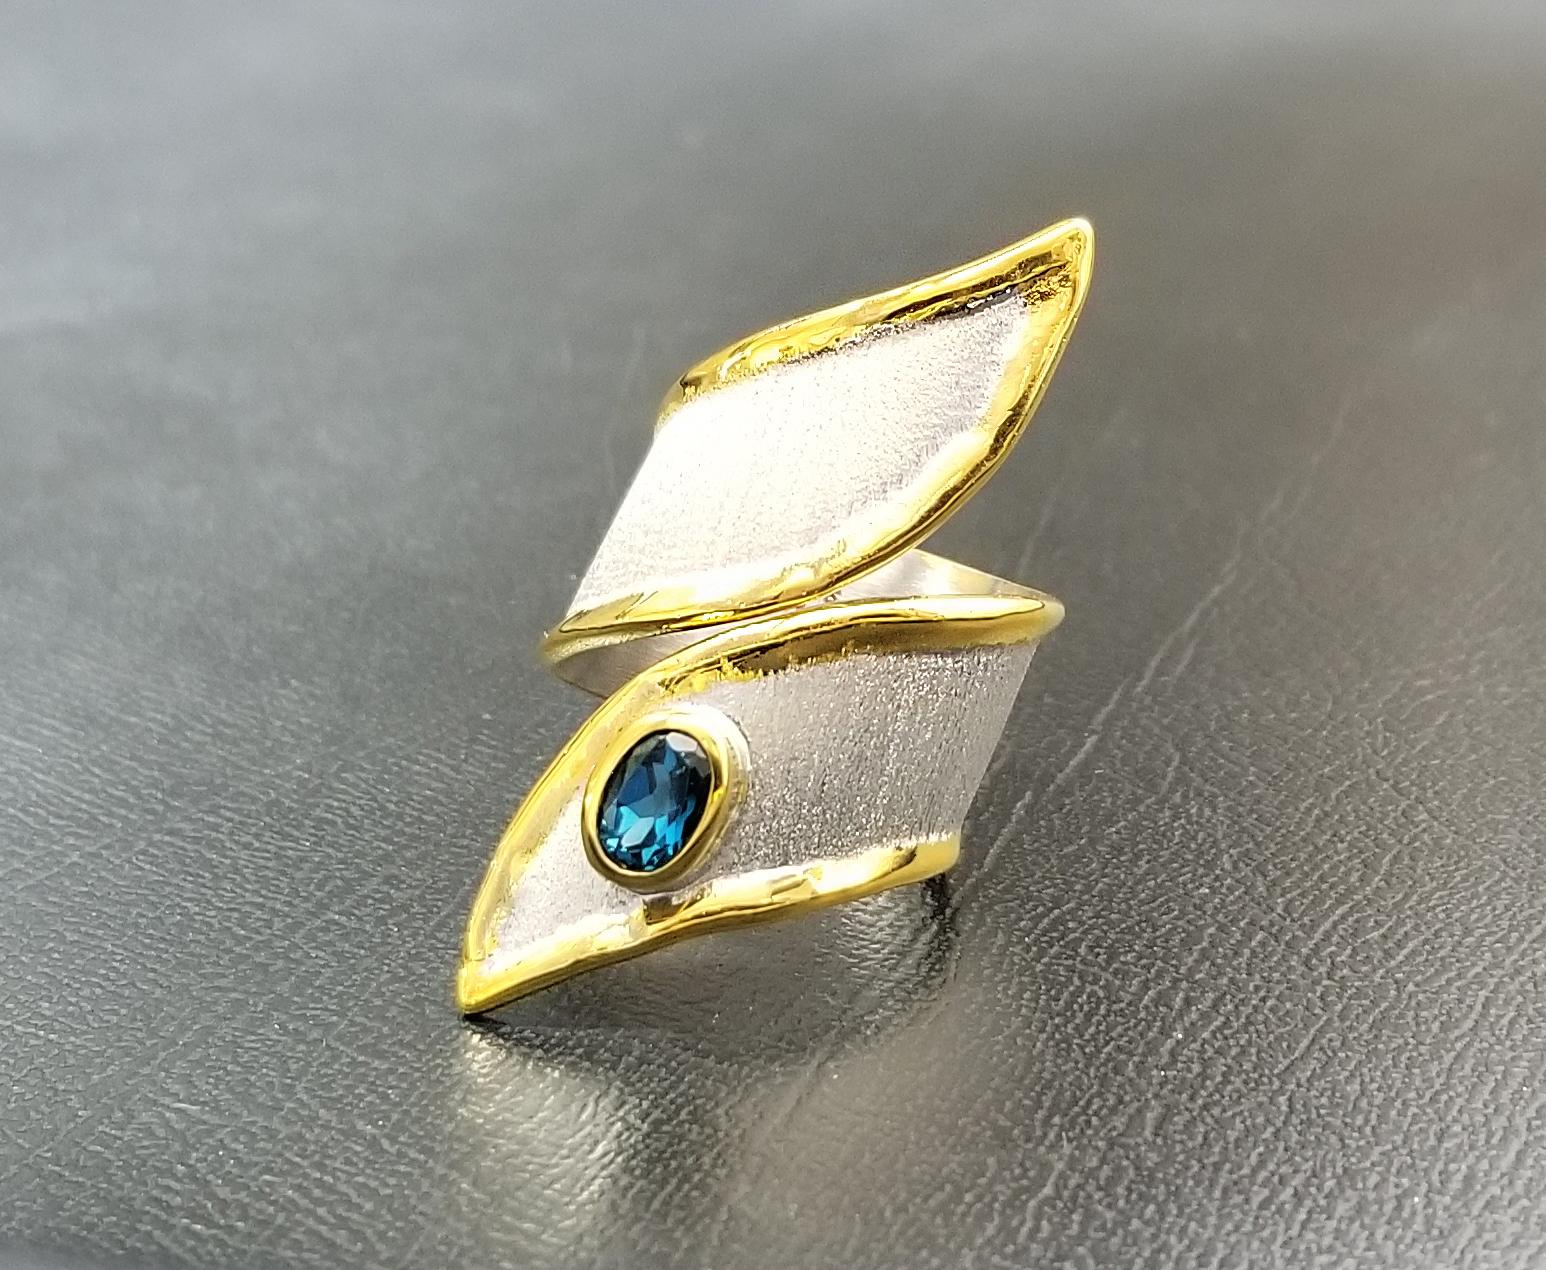 Yianni Creations presents a wide handmade artisan ring from Midas Collection crafted from fine silver 950 purity plated with palladium to resist the elements. Liquid edges are decorated with a thick layer of 24 Karat yellow gold. This asymmetric